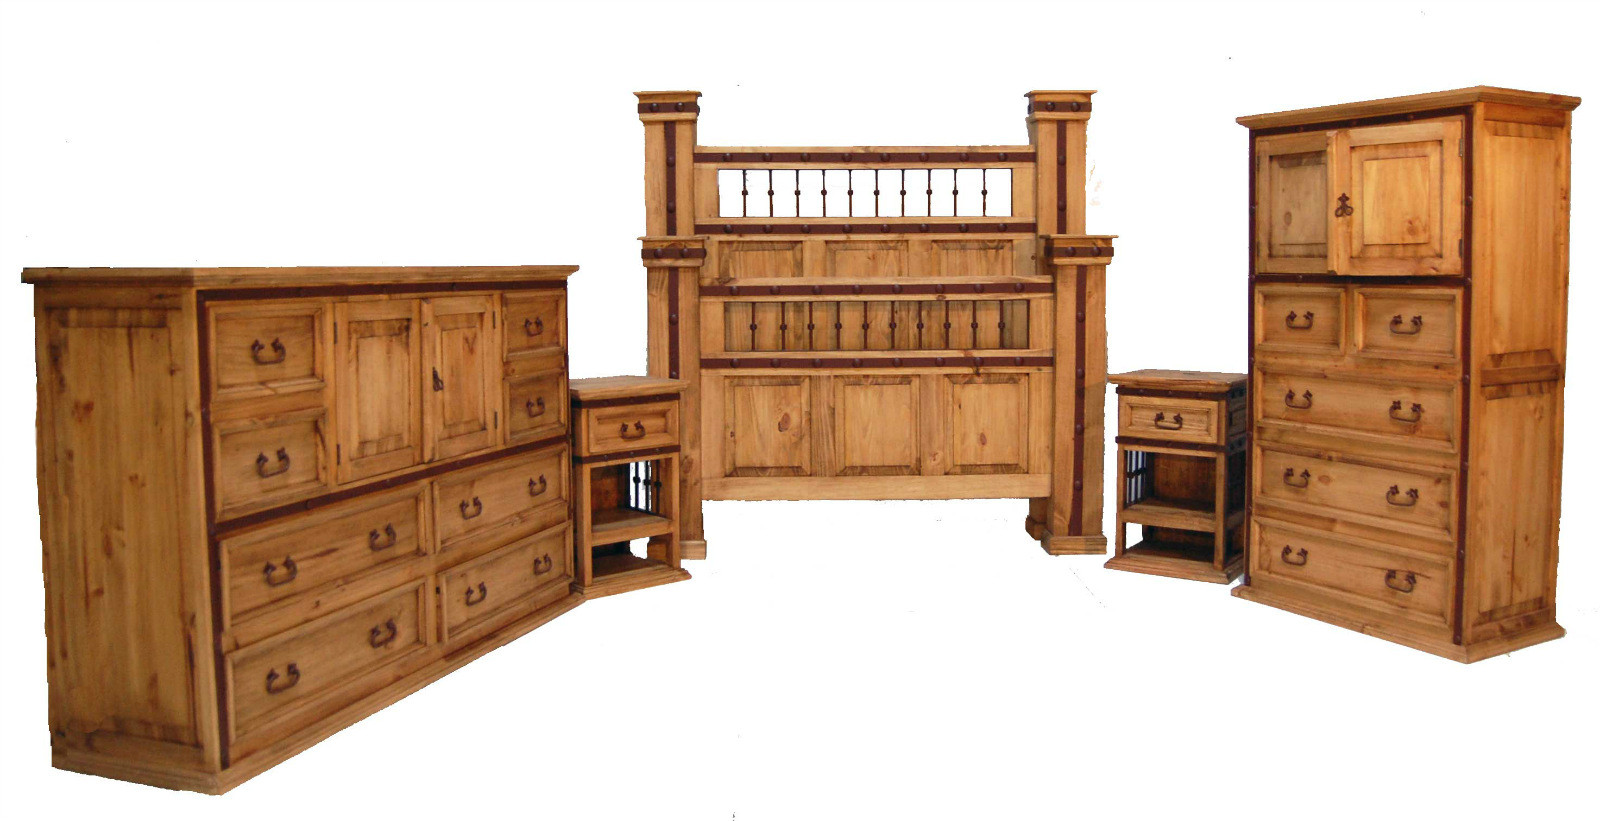 Rustic Bedroom Sets King
 Honey Rustic King Hierro Bedroom Set with Iron Accents